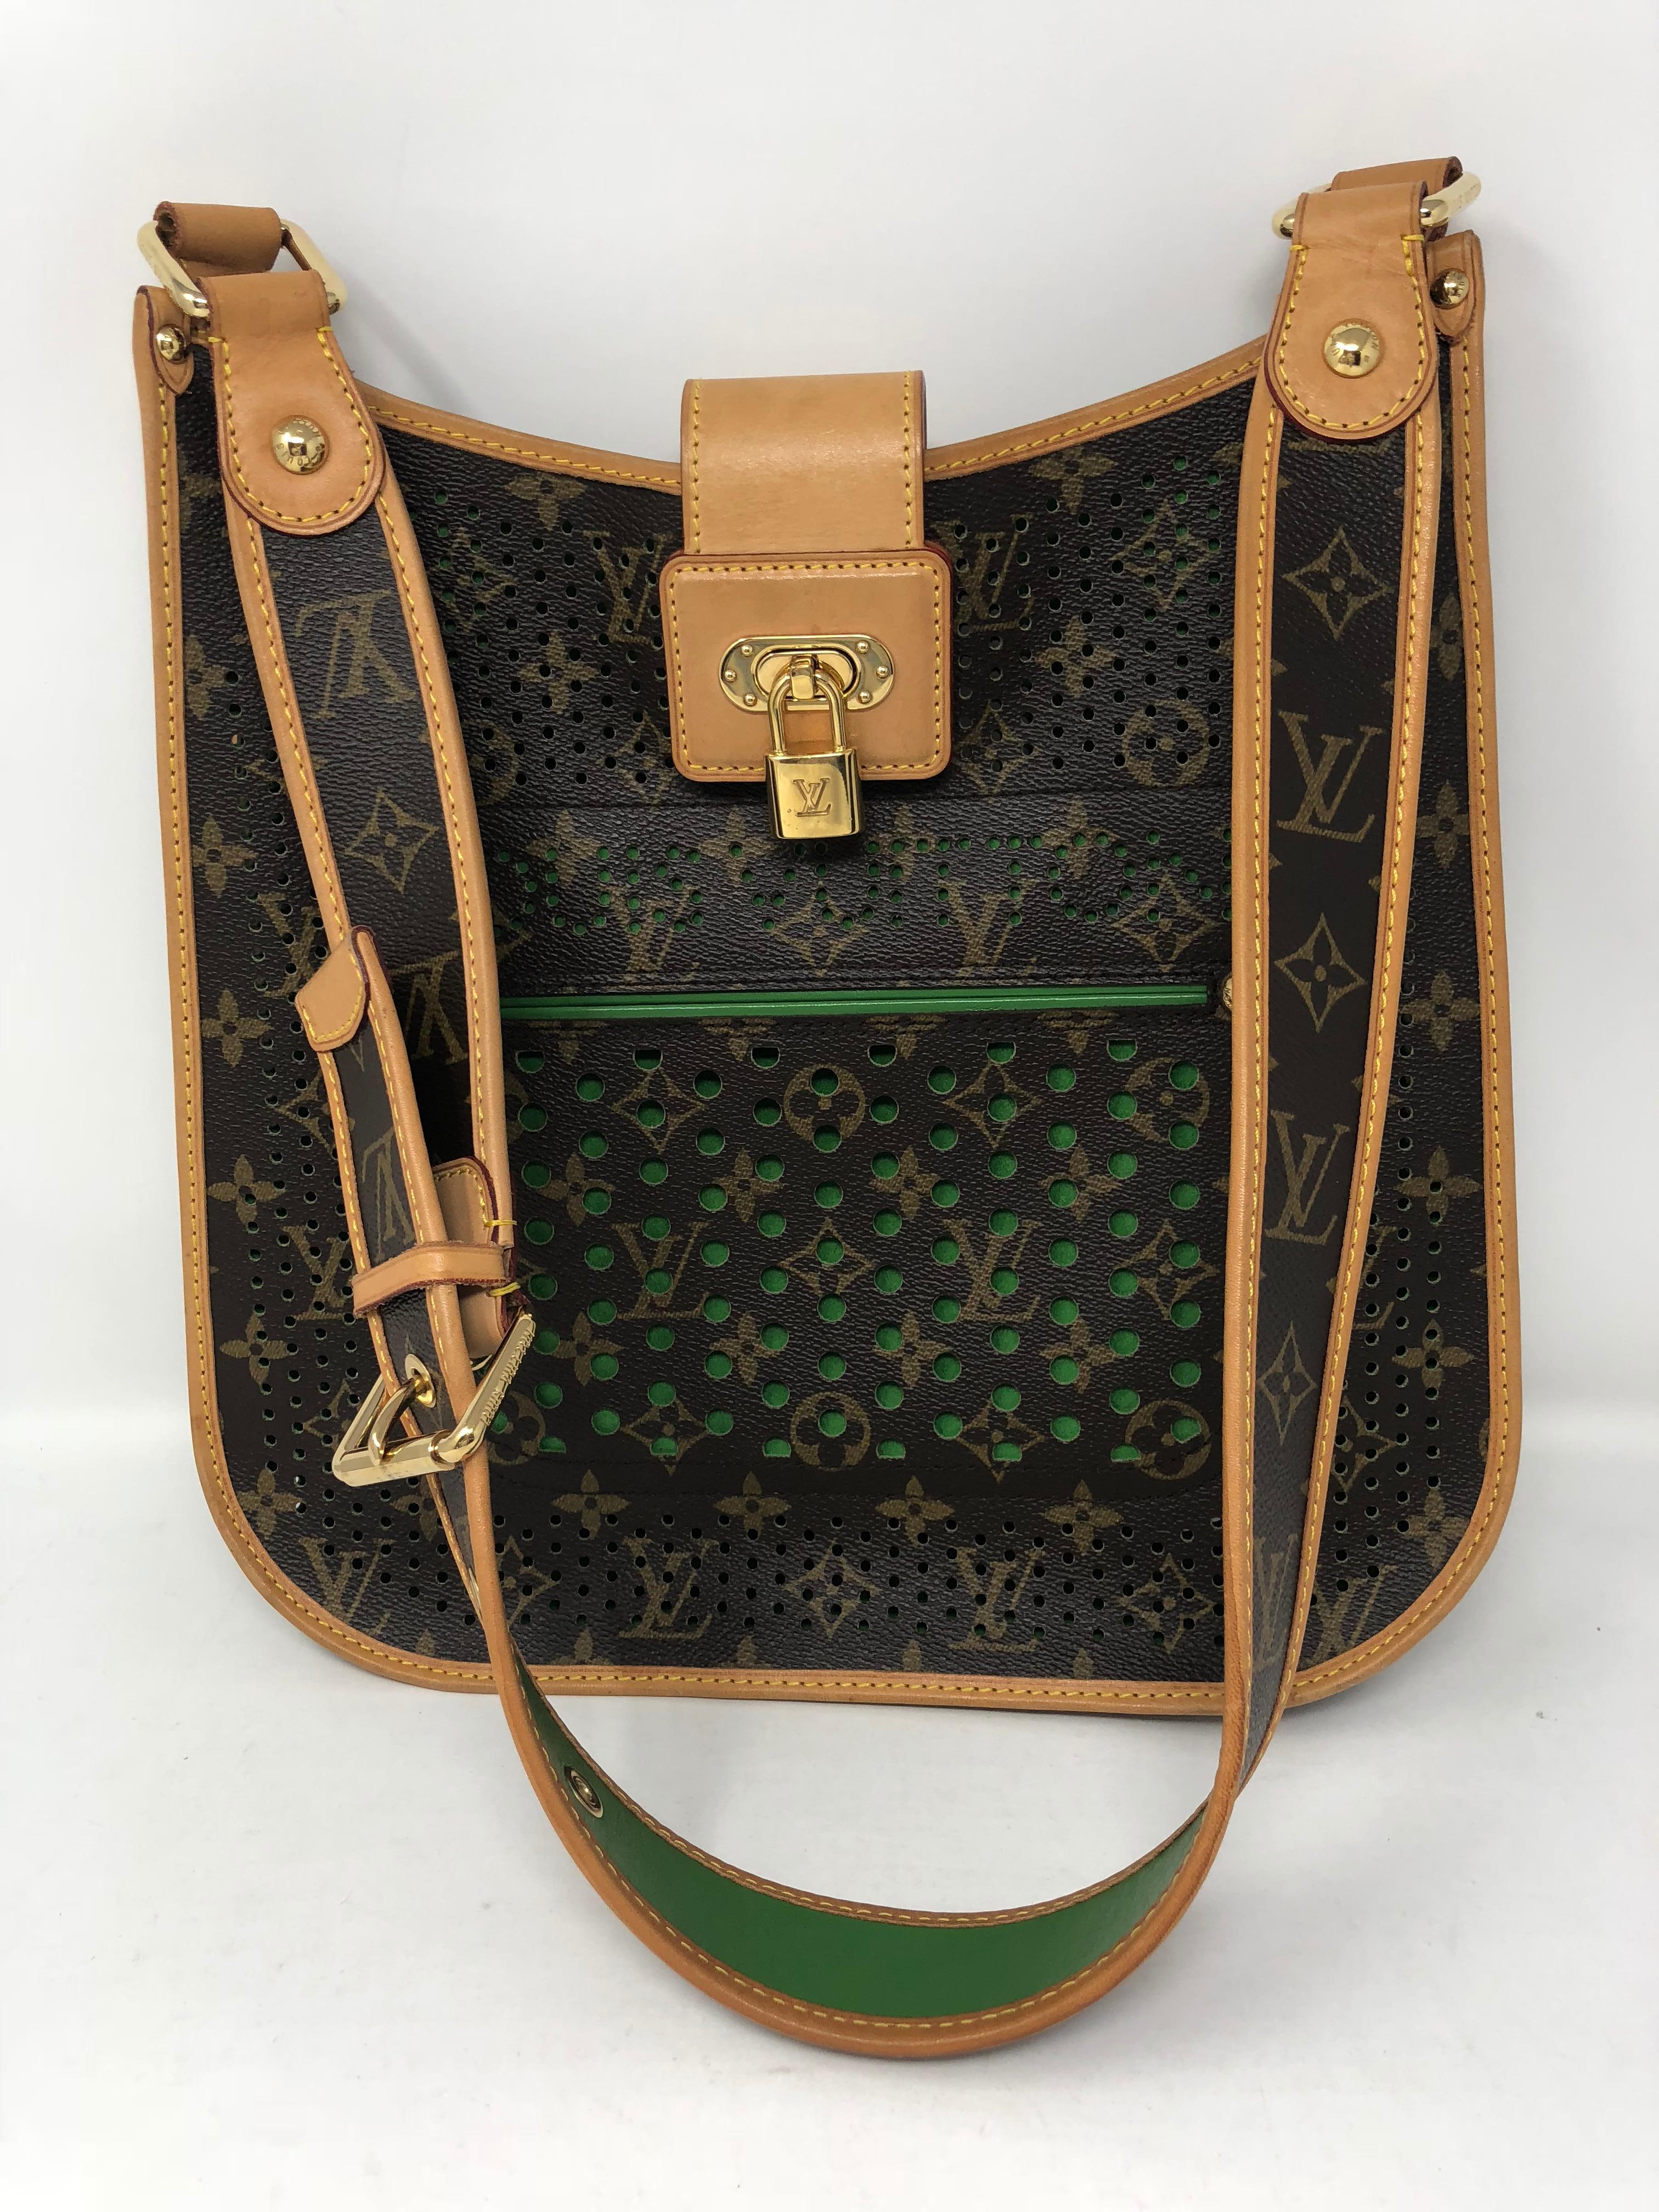 Louis Vuitton Monogram Perforated Musette Green Crossbody Bag circa 2006 designed by Marc Jacobs 
drop: 17 